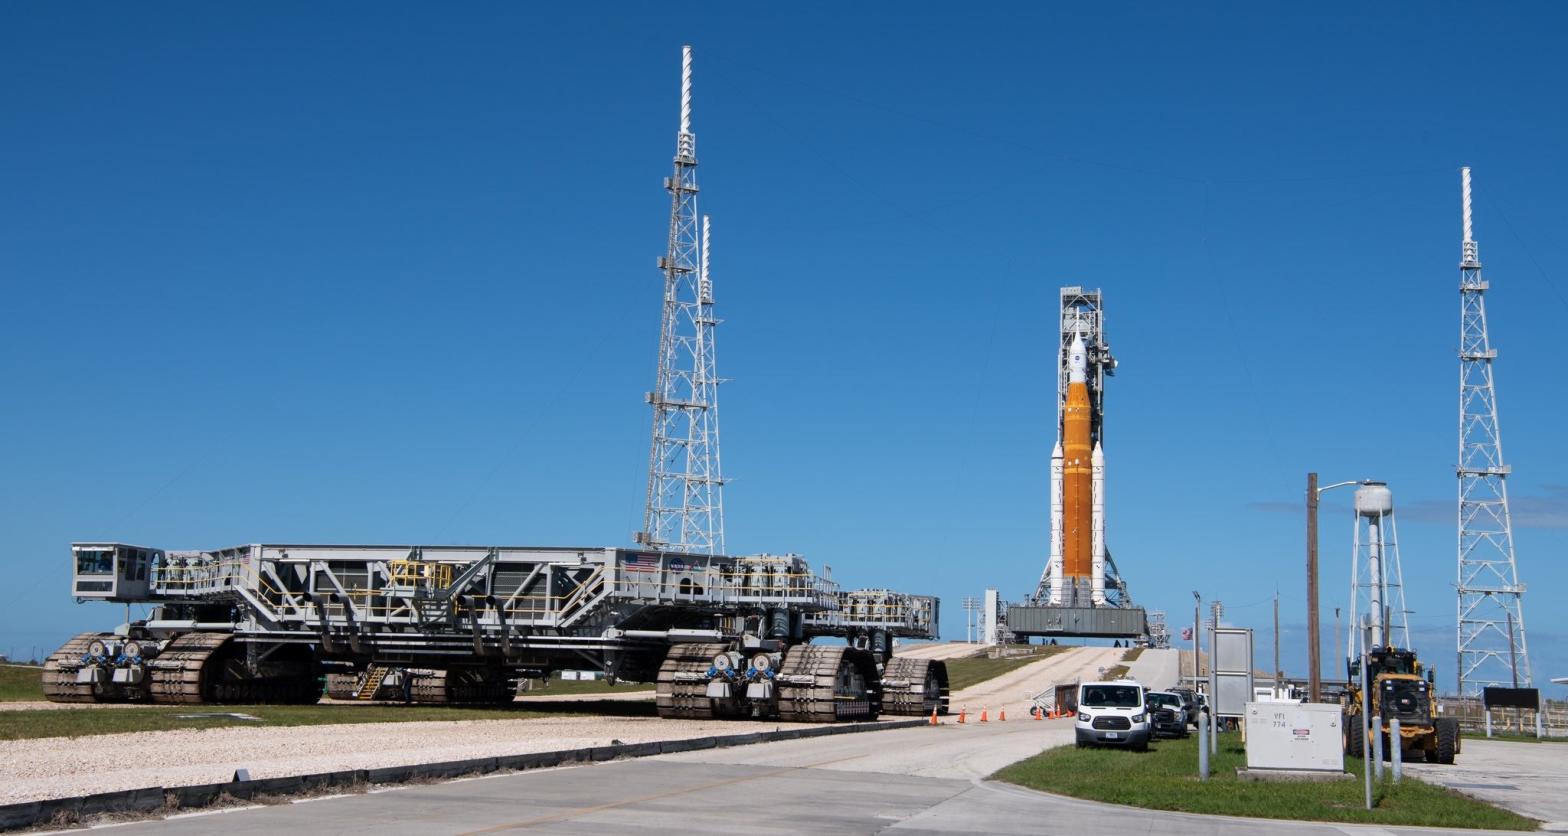 SLS at the Florida launch pad with Crawler-transporter 2 in the foreground.  (Photo: NASA)